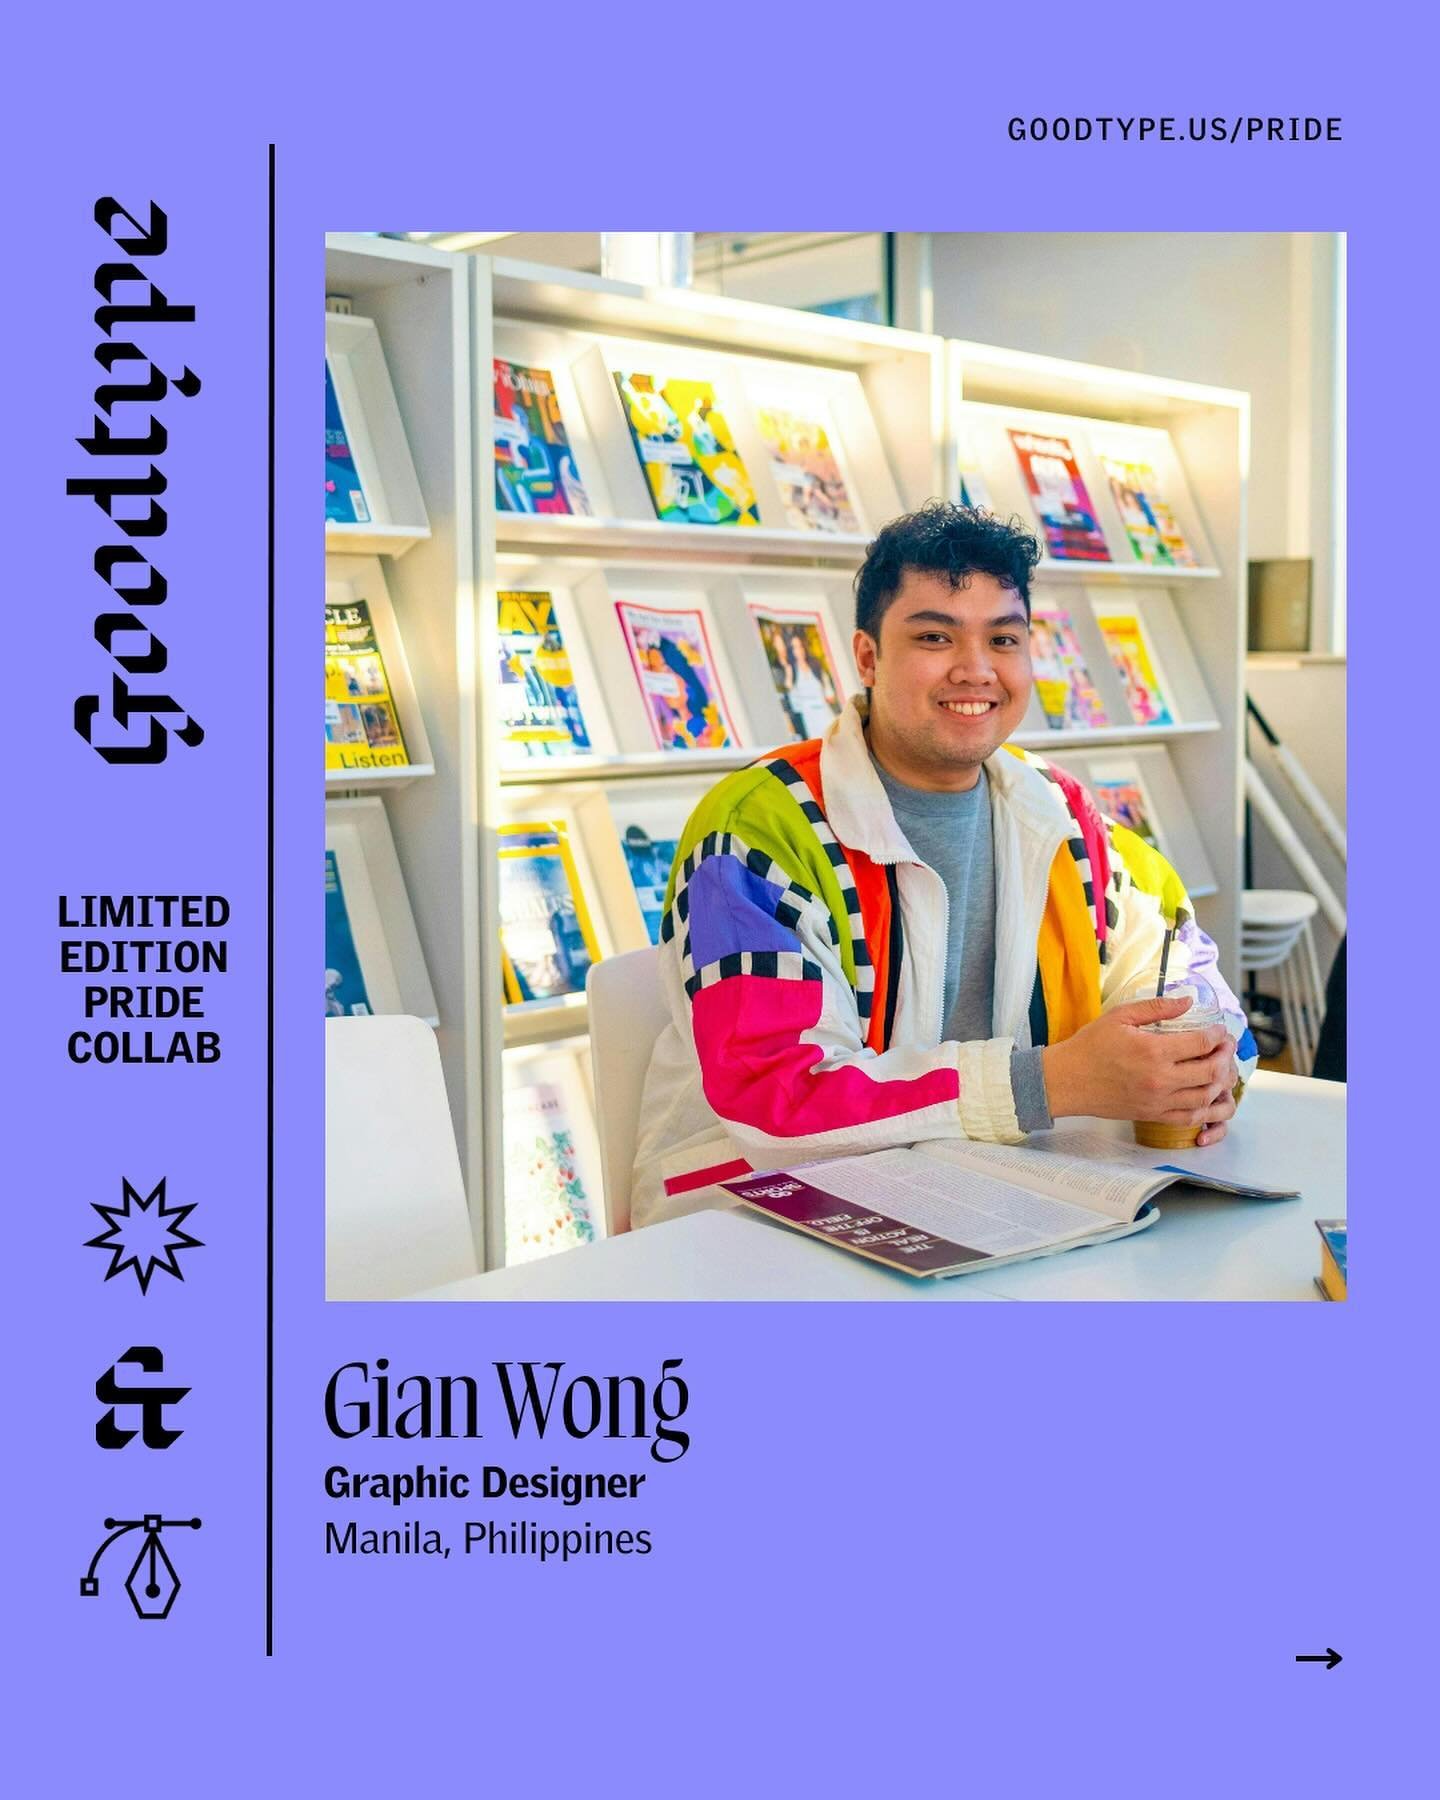 Meet @giancarlowong, who practices graphic design outside his day-to-day work as a Creative Lead at Canva. 

His experience allowed him to develop a specific point of view when designing for brands or good fun&mdash;creating design solutions through 